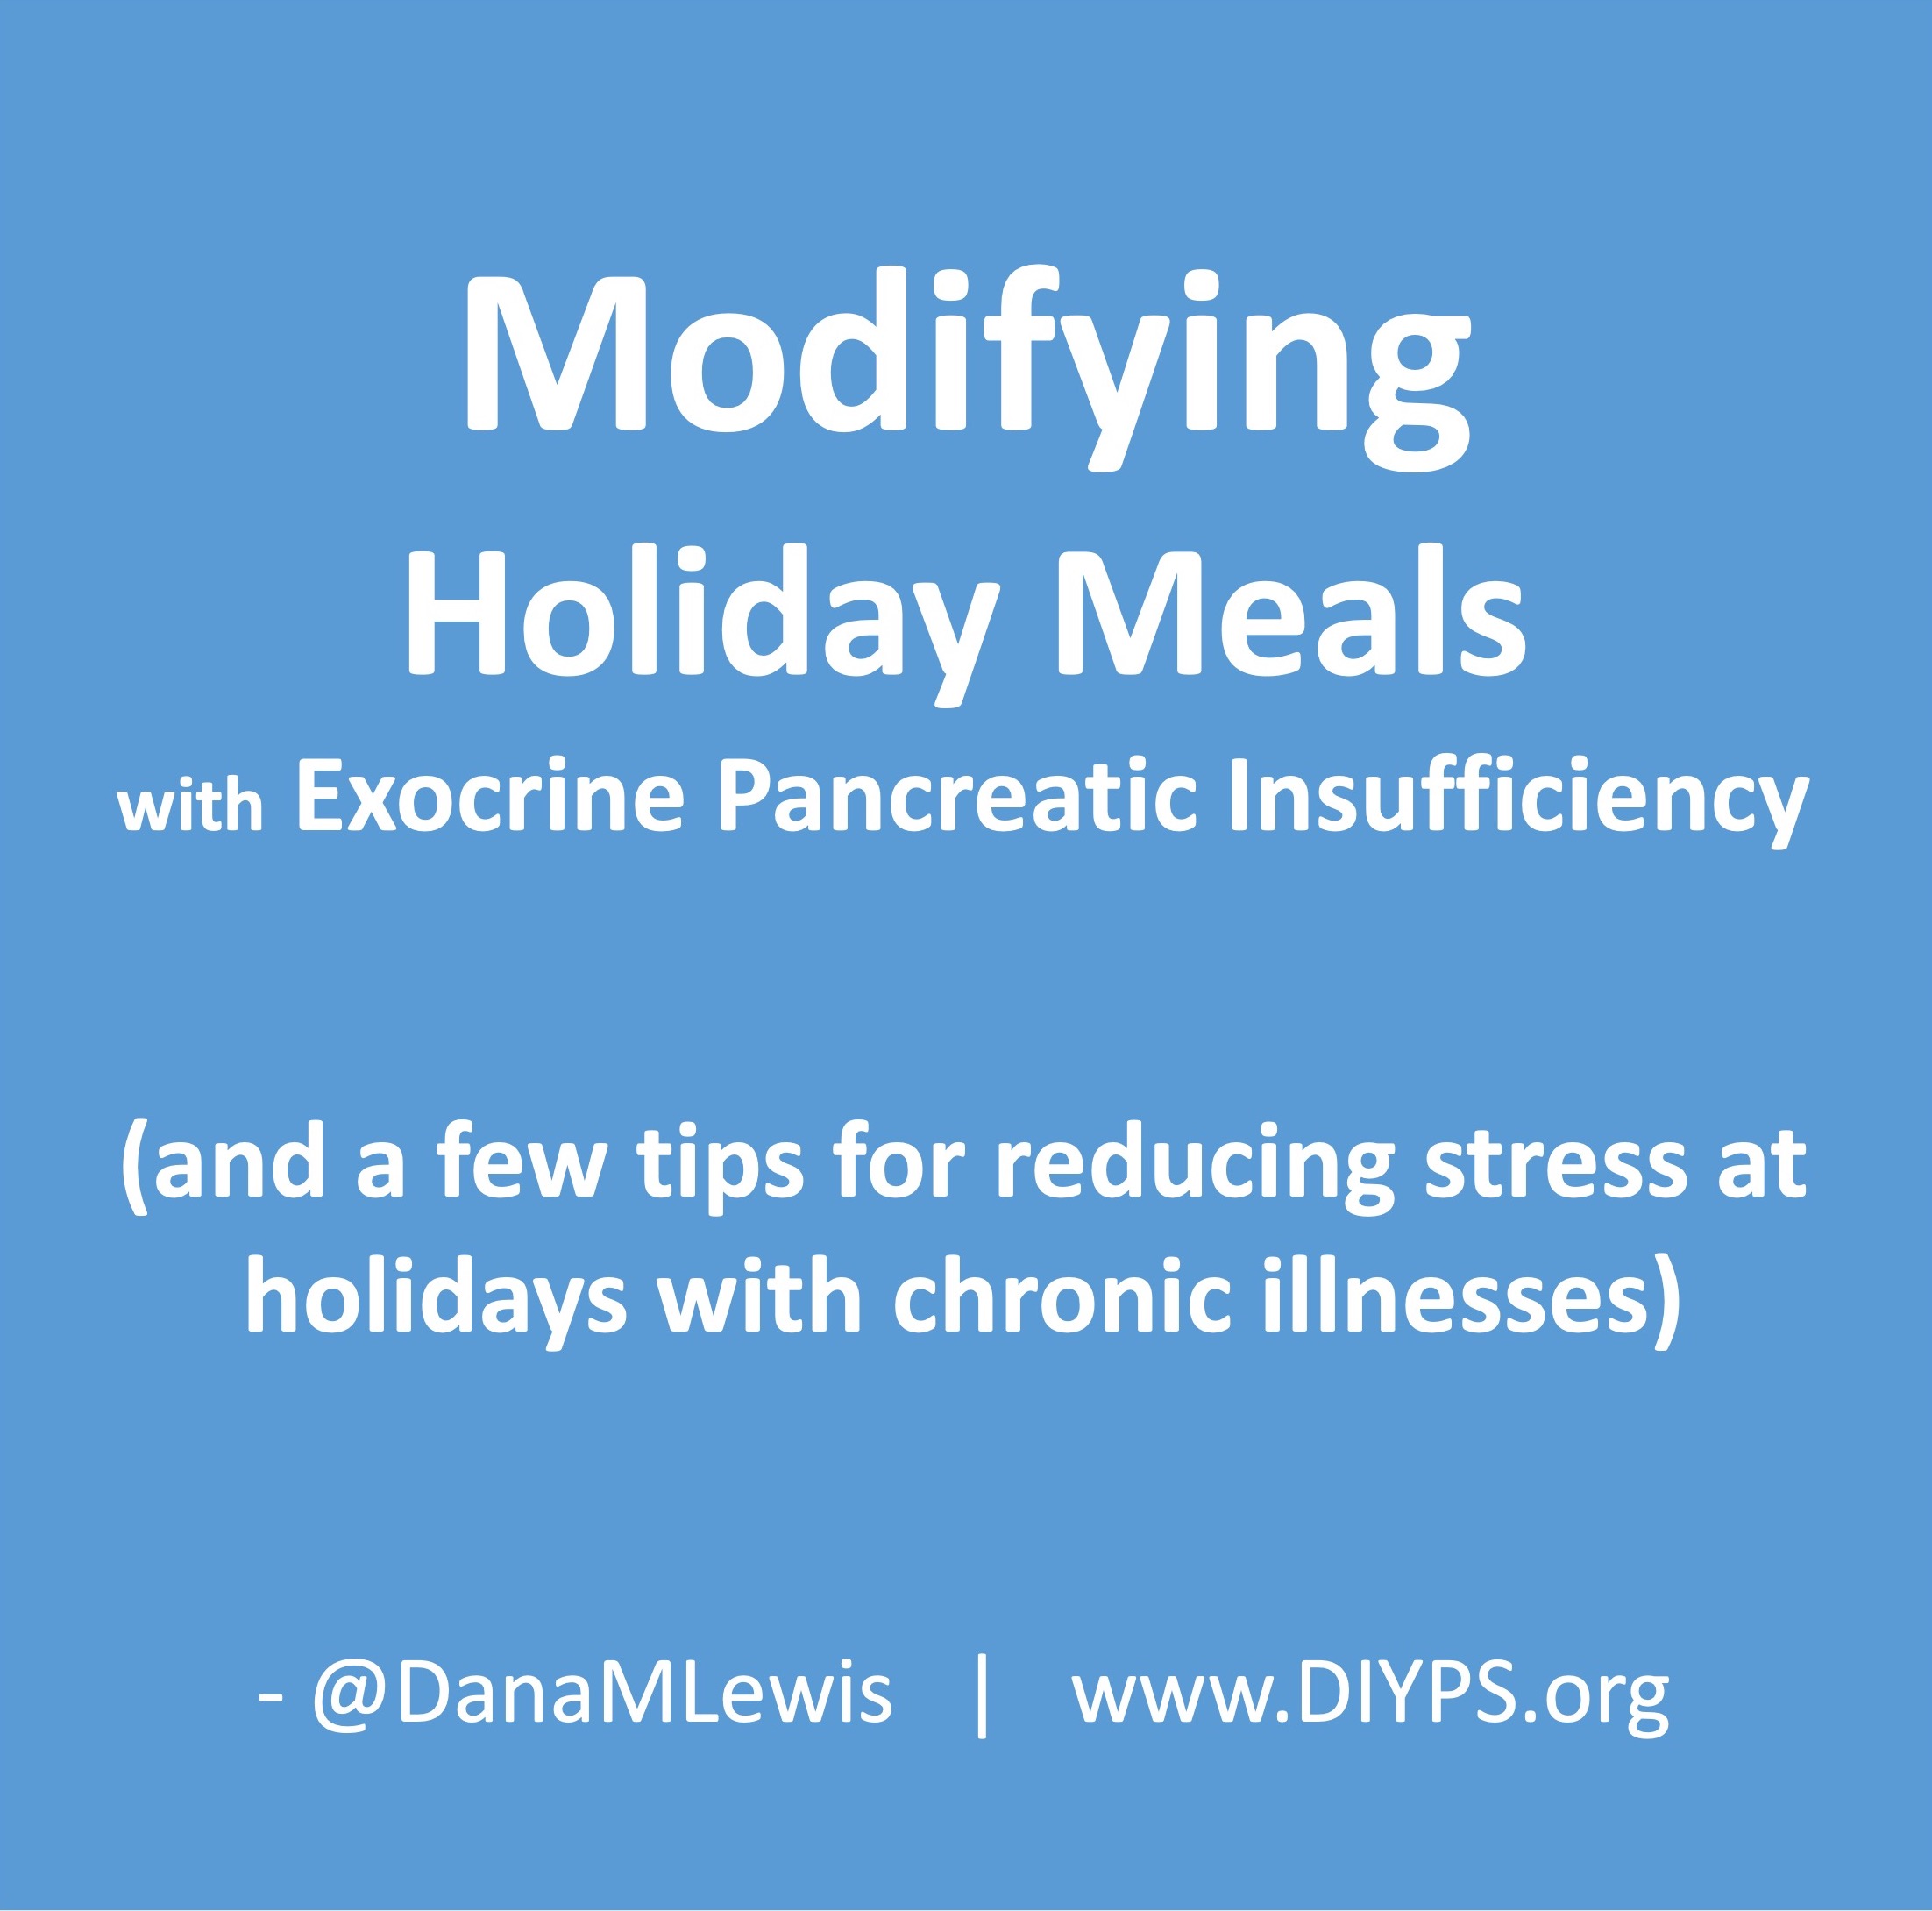 Modifying holiday meals with exocrine pancreatic insufficiency and a few tips for reducing stress at the holidays with chronic illnesses in general